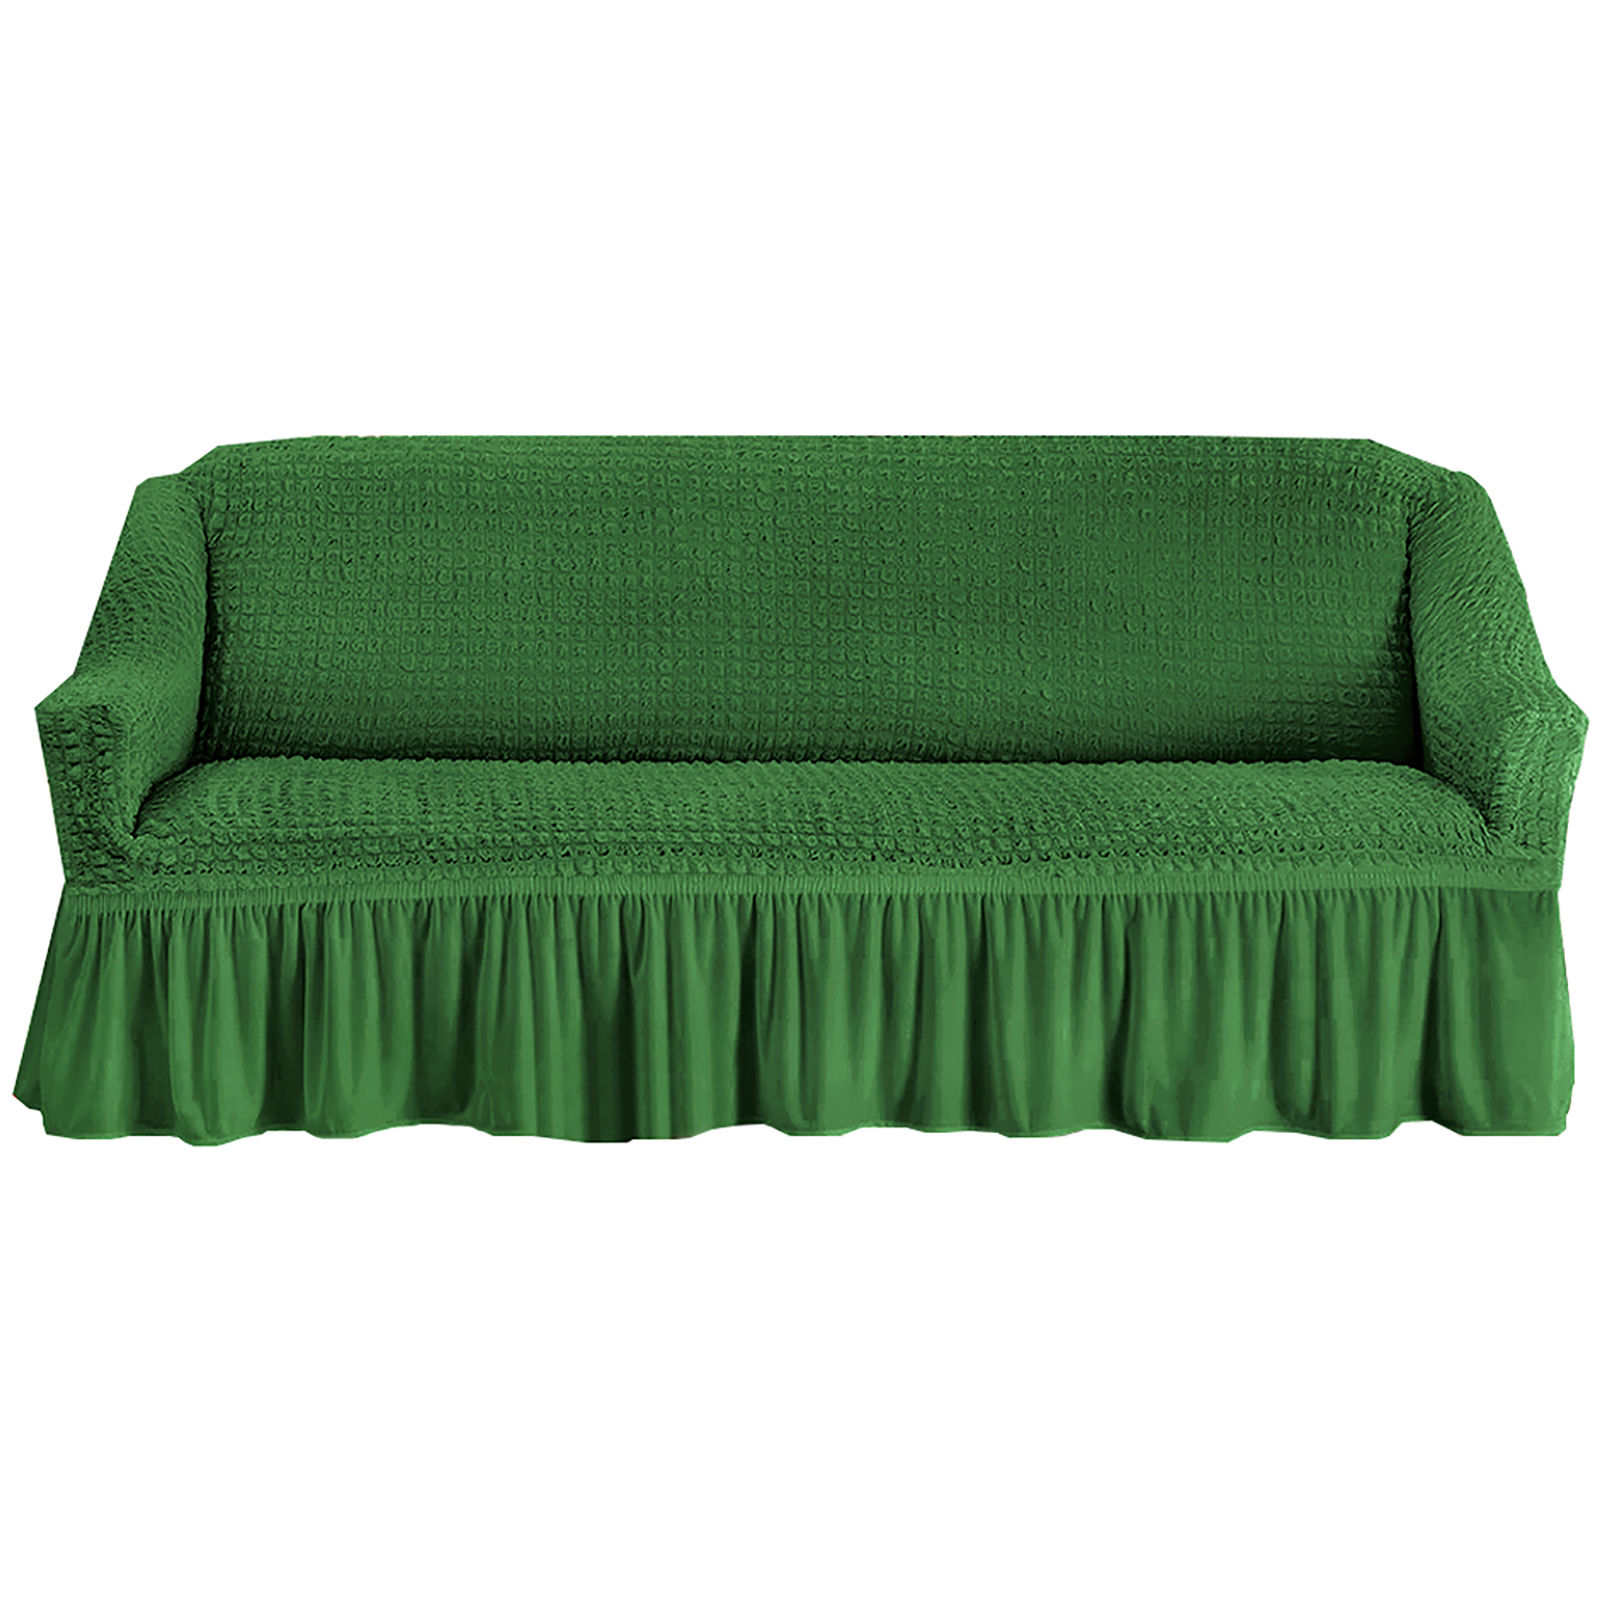 Stretch Sofa Slipcover, 3 Seater Sofa Slipcovers With Skirt With Armless Soft Sofa Cover Elastic Straps Sofa Slipcover For Living Room Kids Pets-Green A-Medium